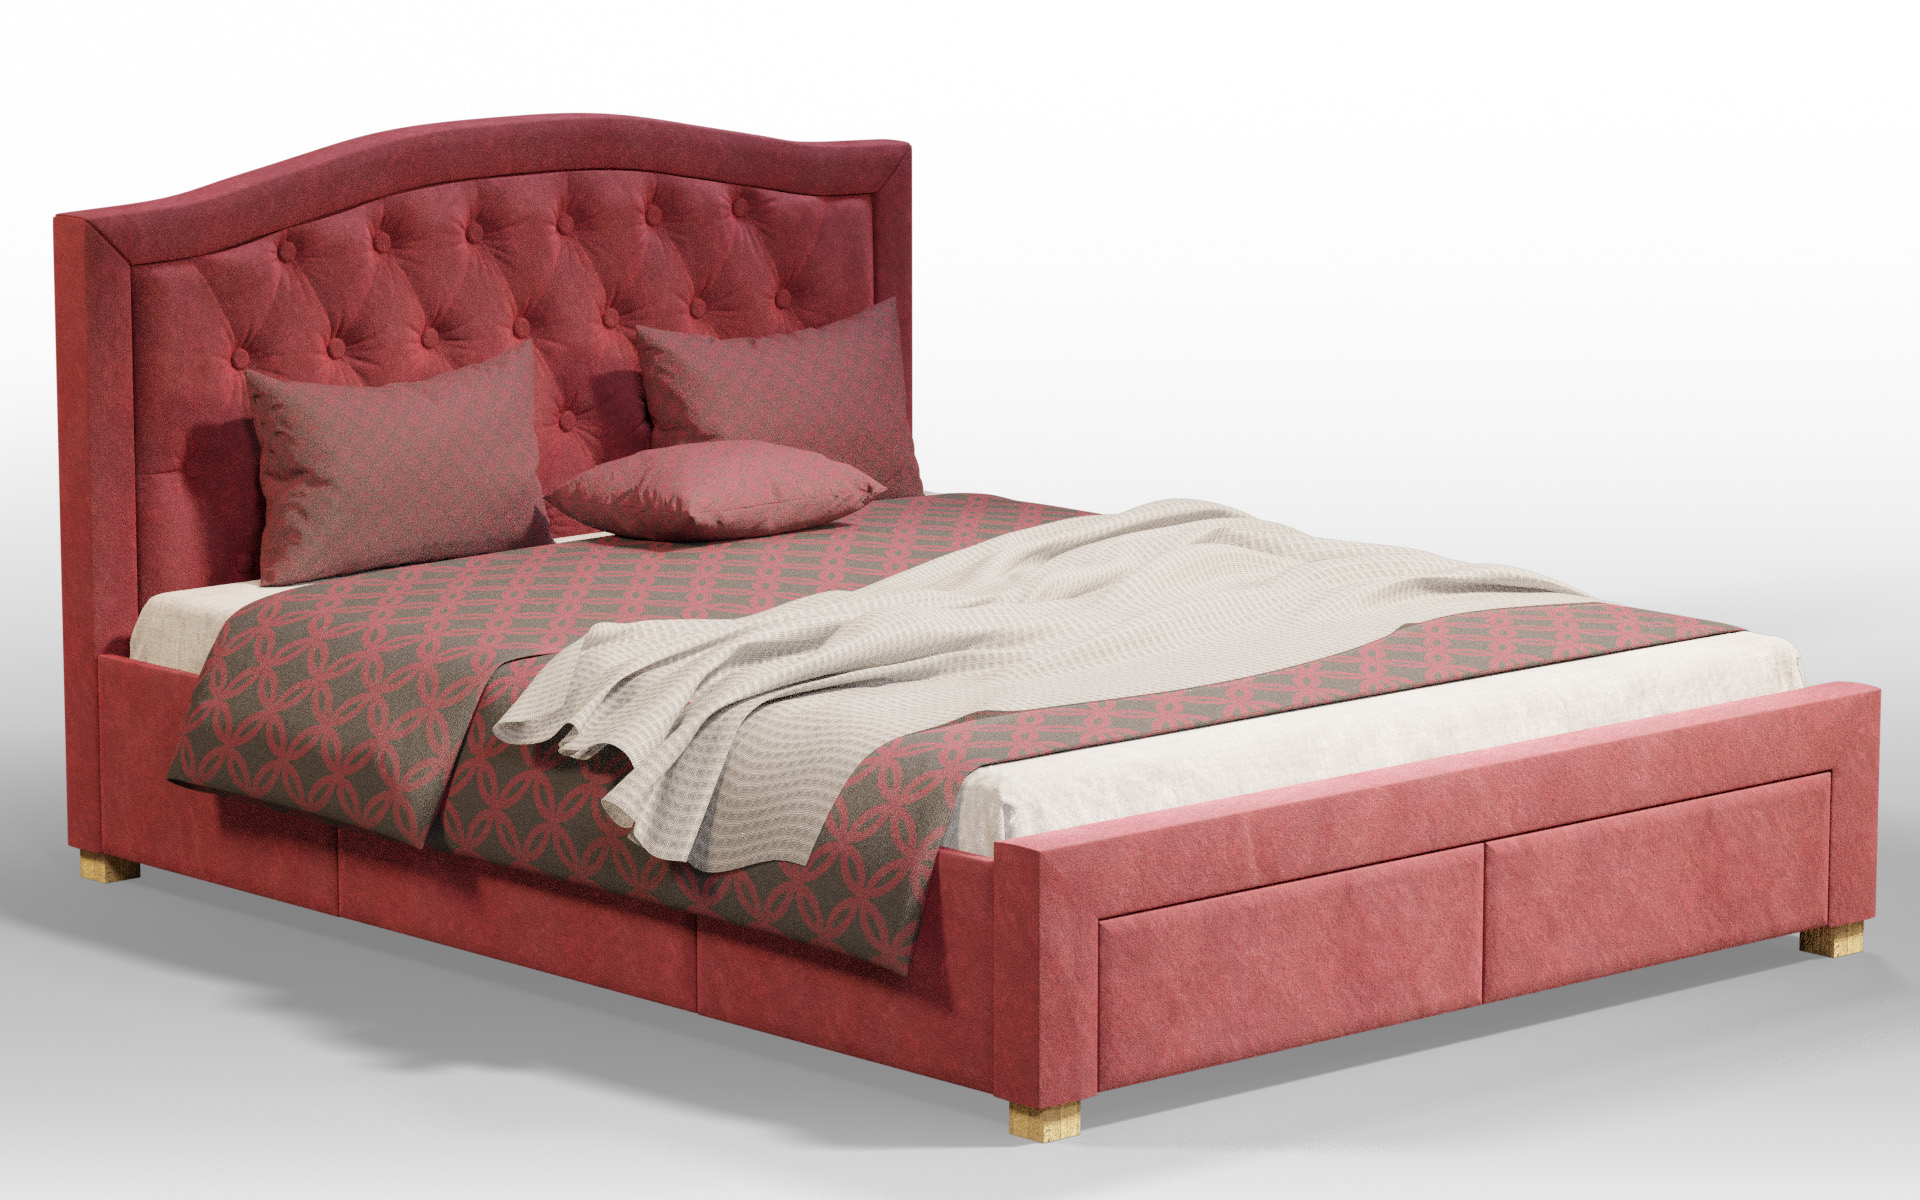 Bed with a headboard